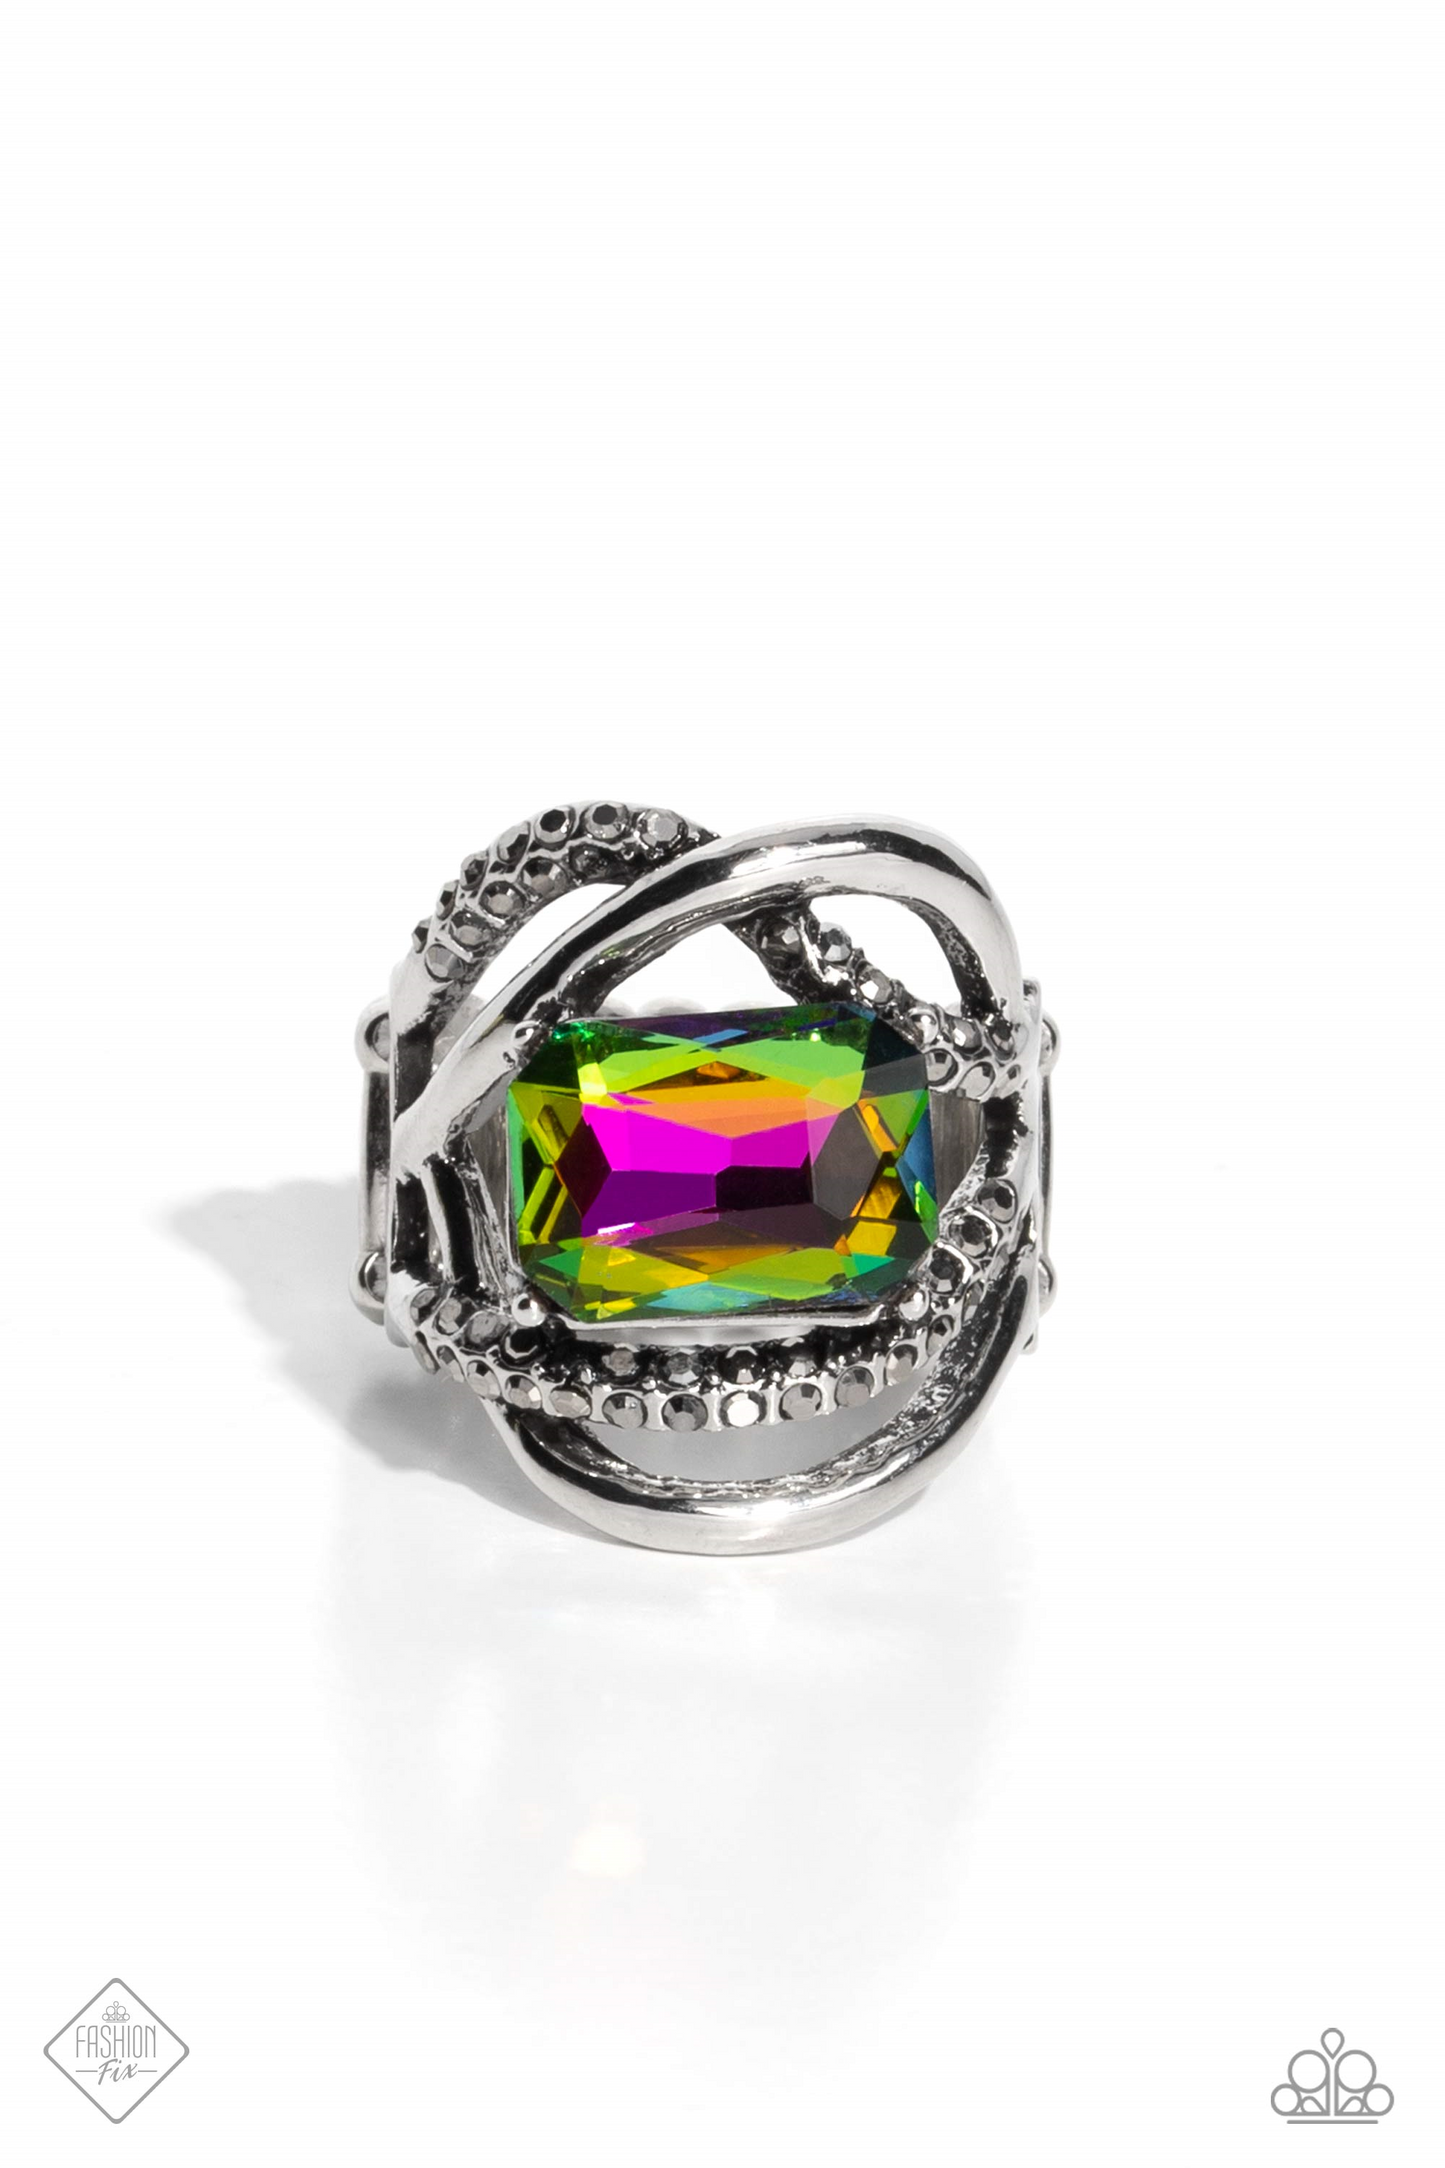 Incandescent Introduction - Multi color ring